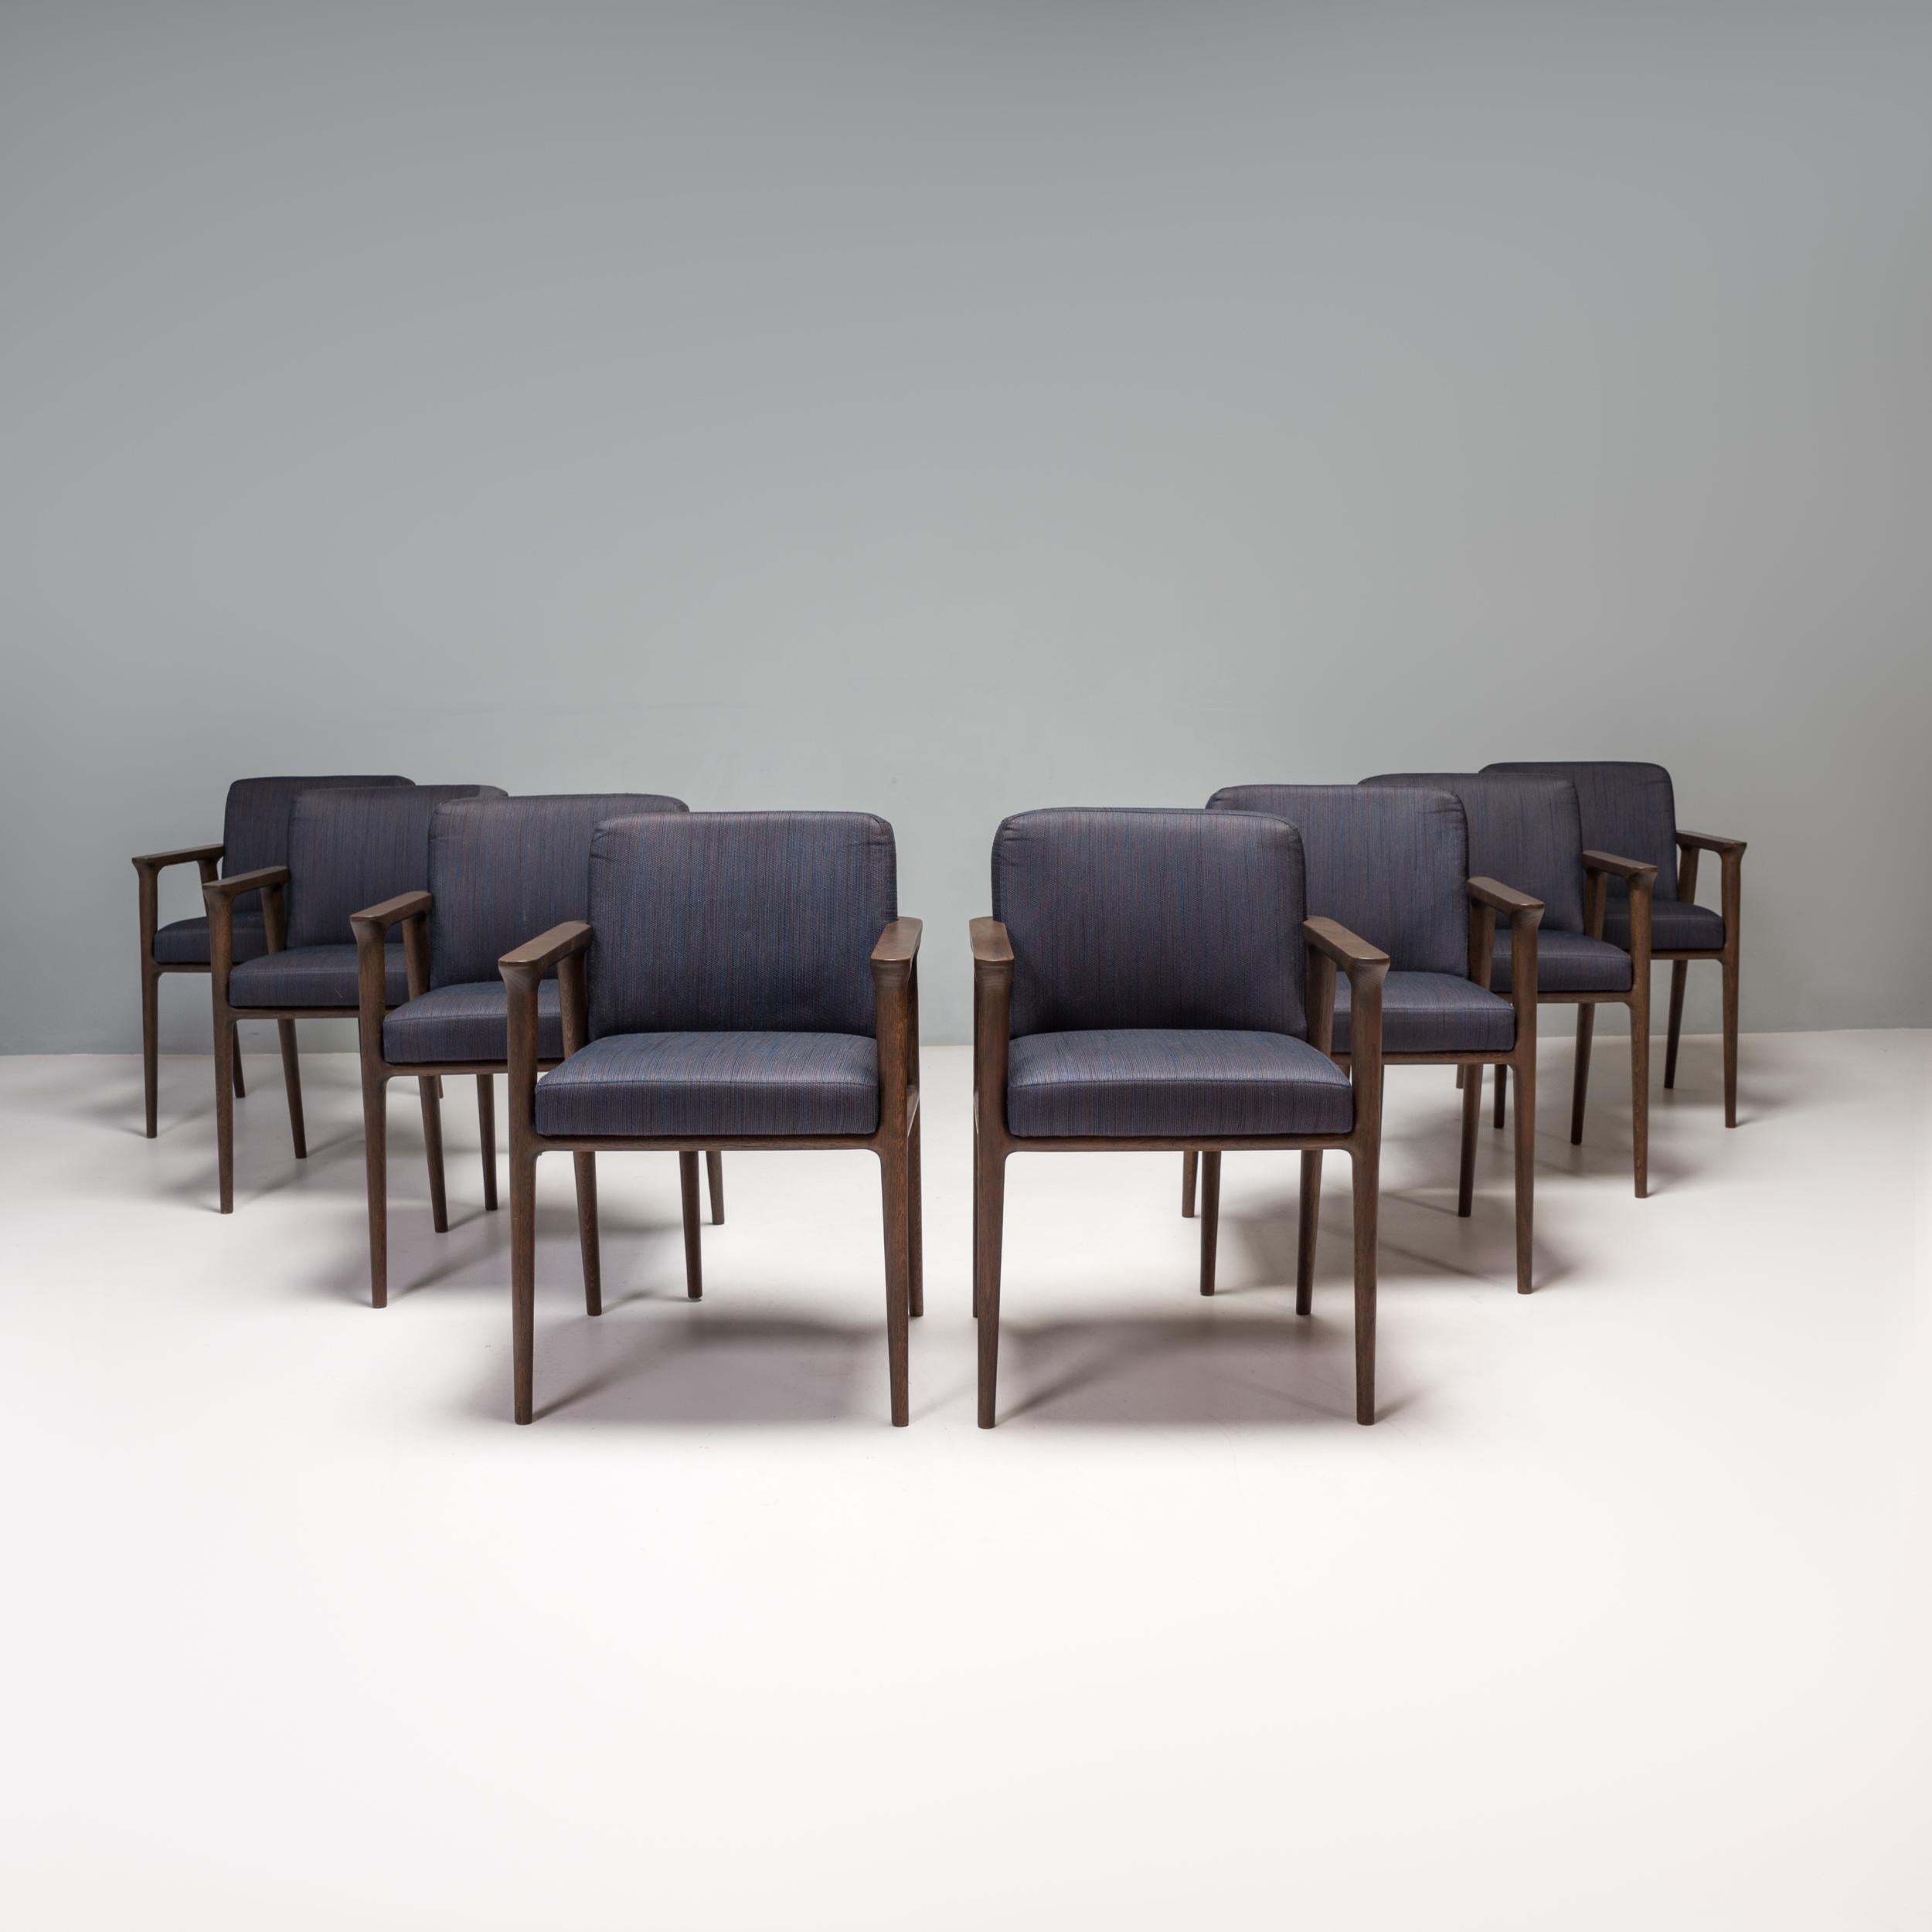 Originally designed by Marcel Wanders for Moooi in 2013, the Zio range exudes classic elegance.

Constructed from wenge stained oak frames, the dining chairs feature tapered legs and a rounded back rest.

The separate seat and back cushions are